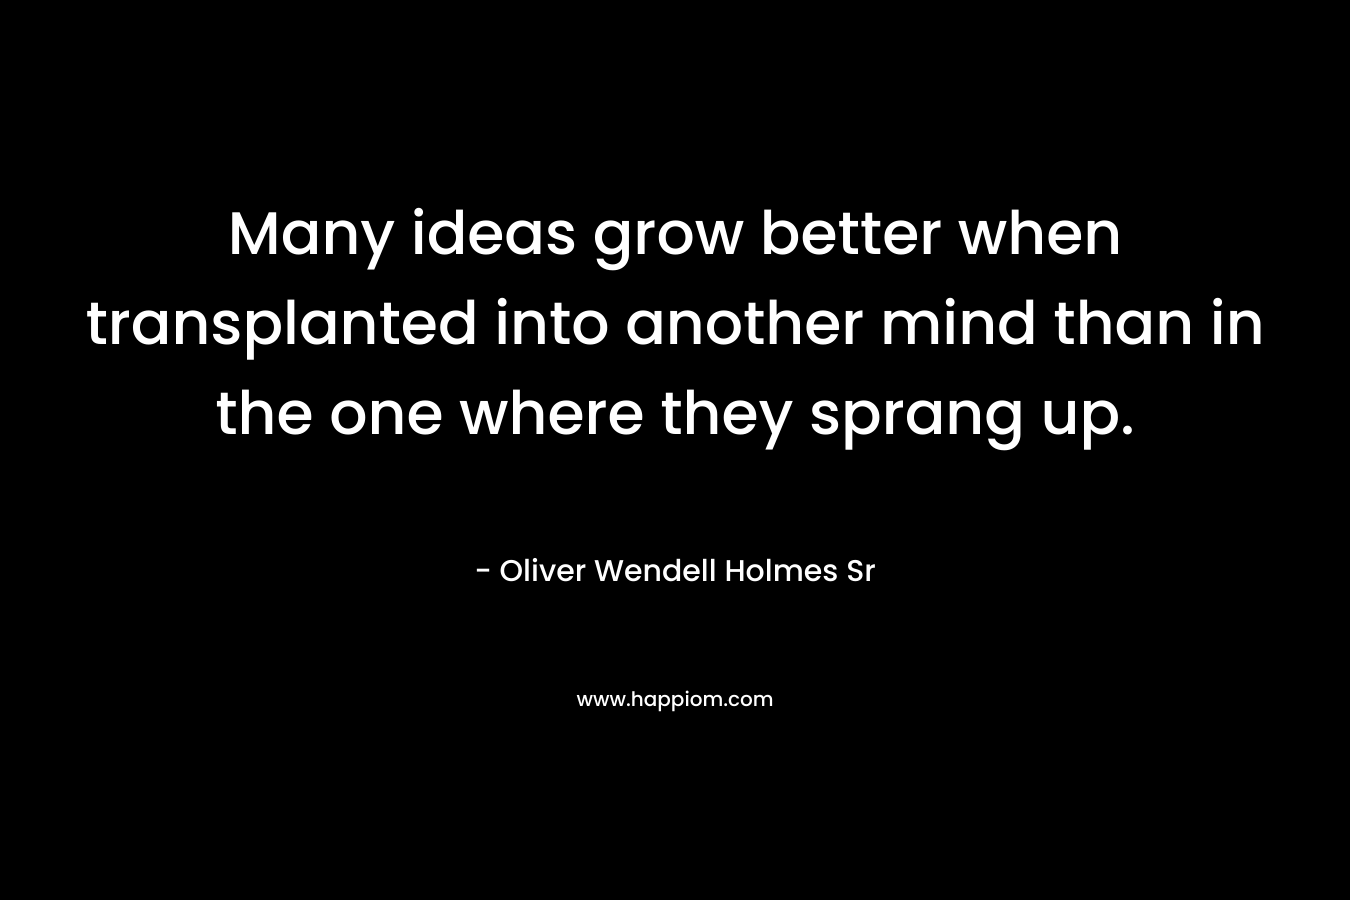 Many ideas grow better when transplanted into another mind than in the one where they sprang up. – Oliver Wendell Holmes Sr